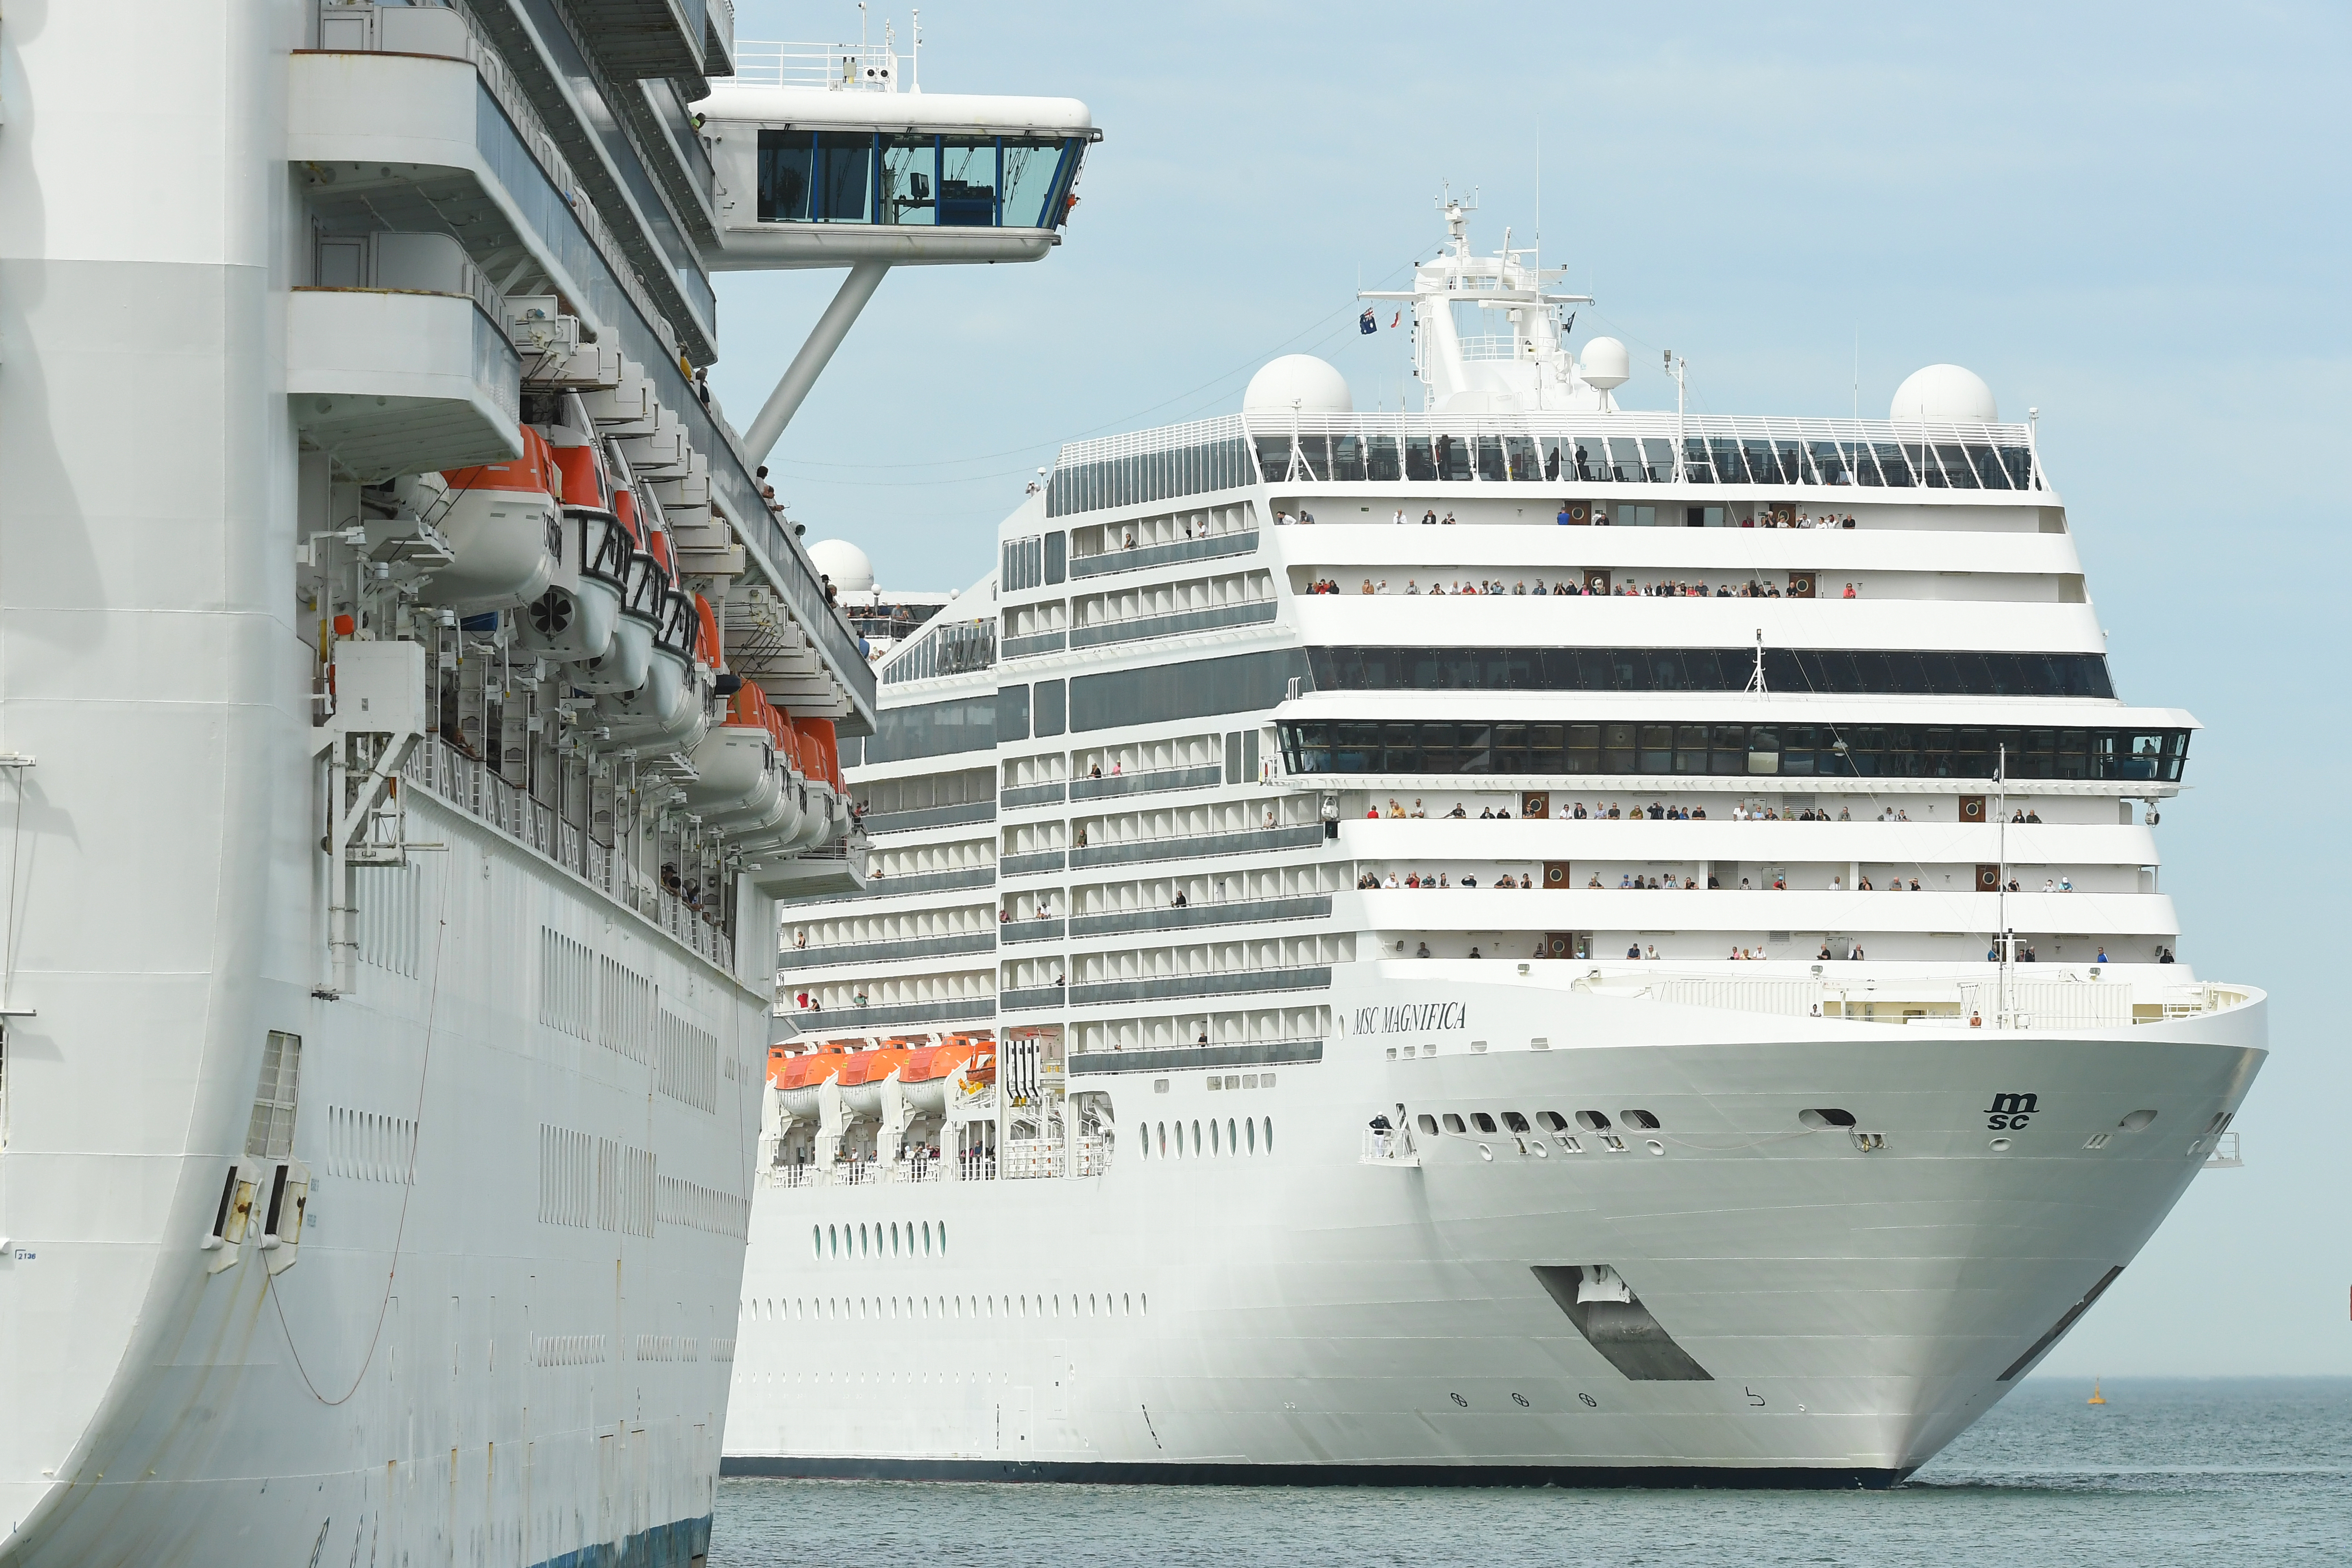 More than 2000 passengers and crew are temporarily locked down on a ship while they undergo coronavirus screenings. 